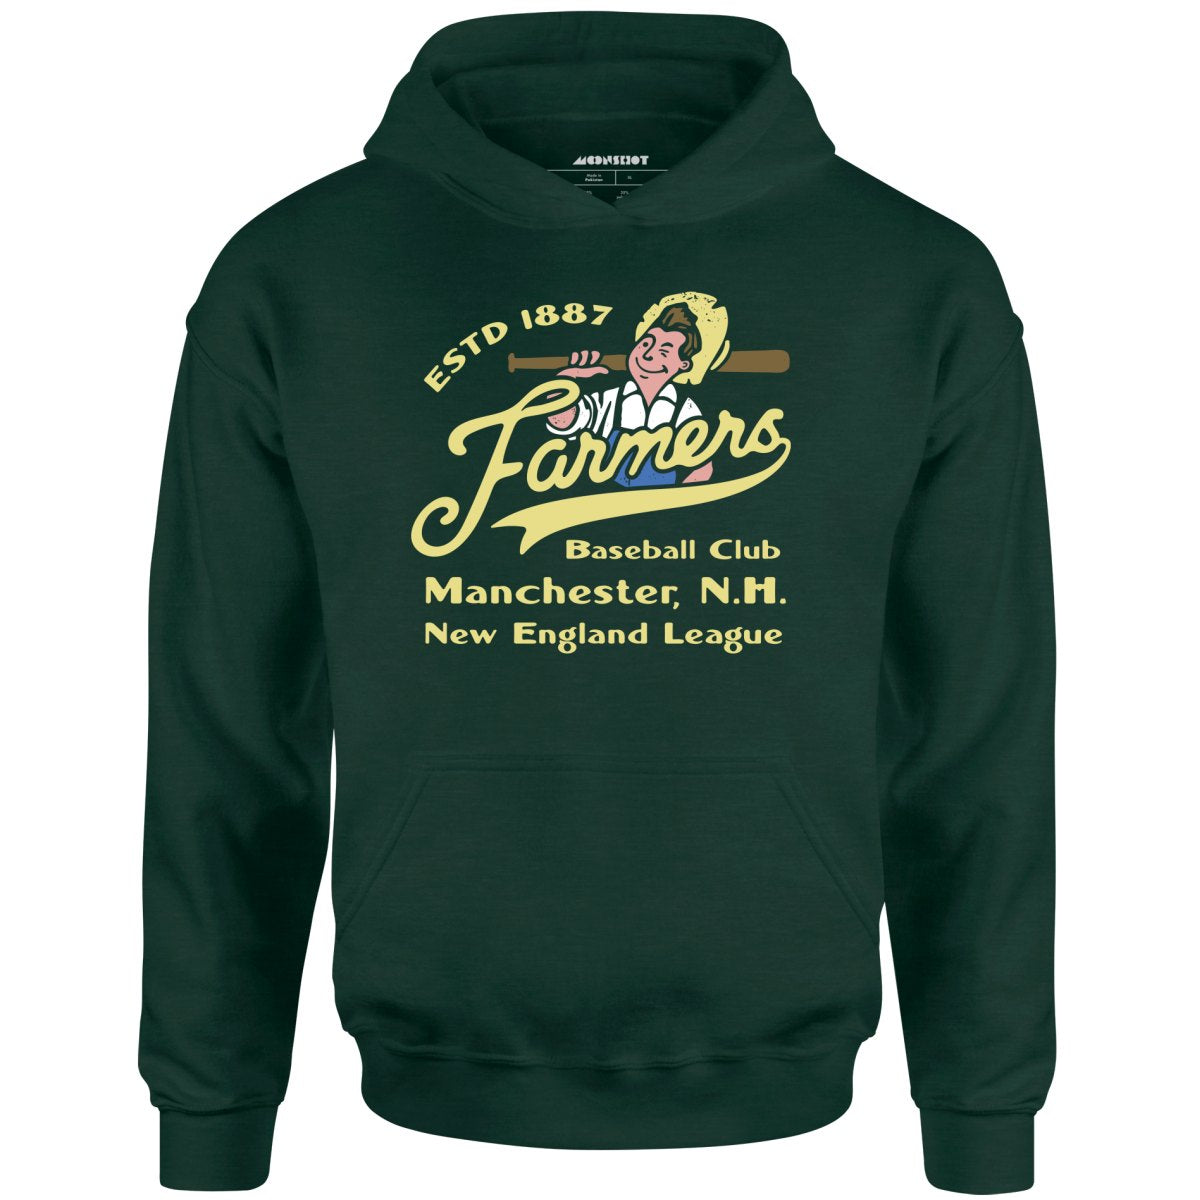 Manchester Farmers - New Hampshire - Vintage Defunct Baseball Teams - Unisex Hoodie